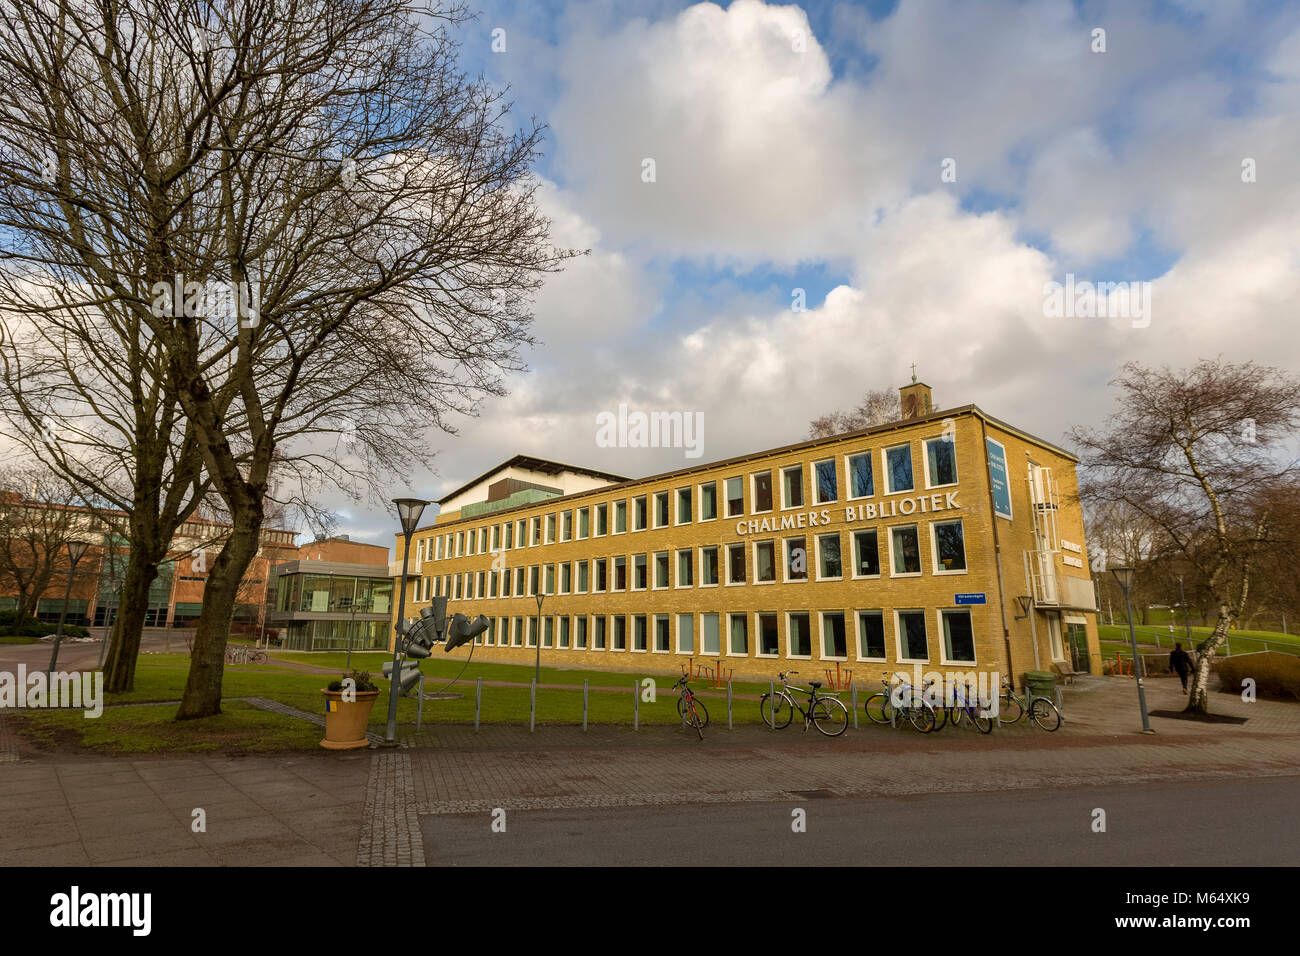 GOTHENBURG, SWEDEN - JANUARY 27 2018: Exterior view of Chalmers University of Technology library in Gothenburg, Sweden  Model Release: No.  Property Release: No. Stock Photo